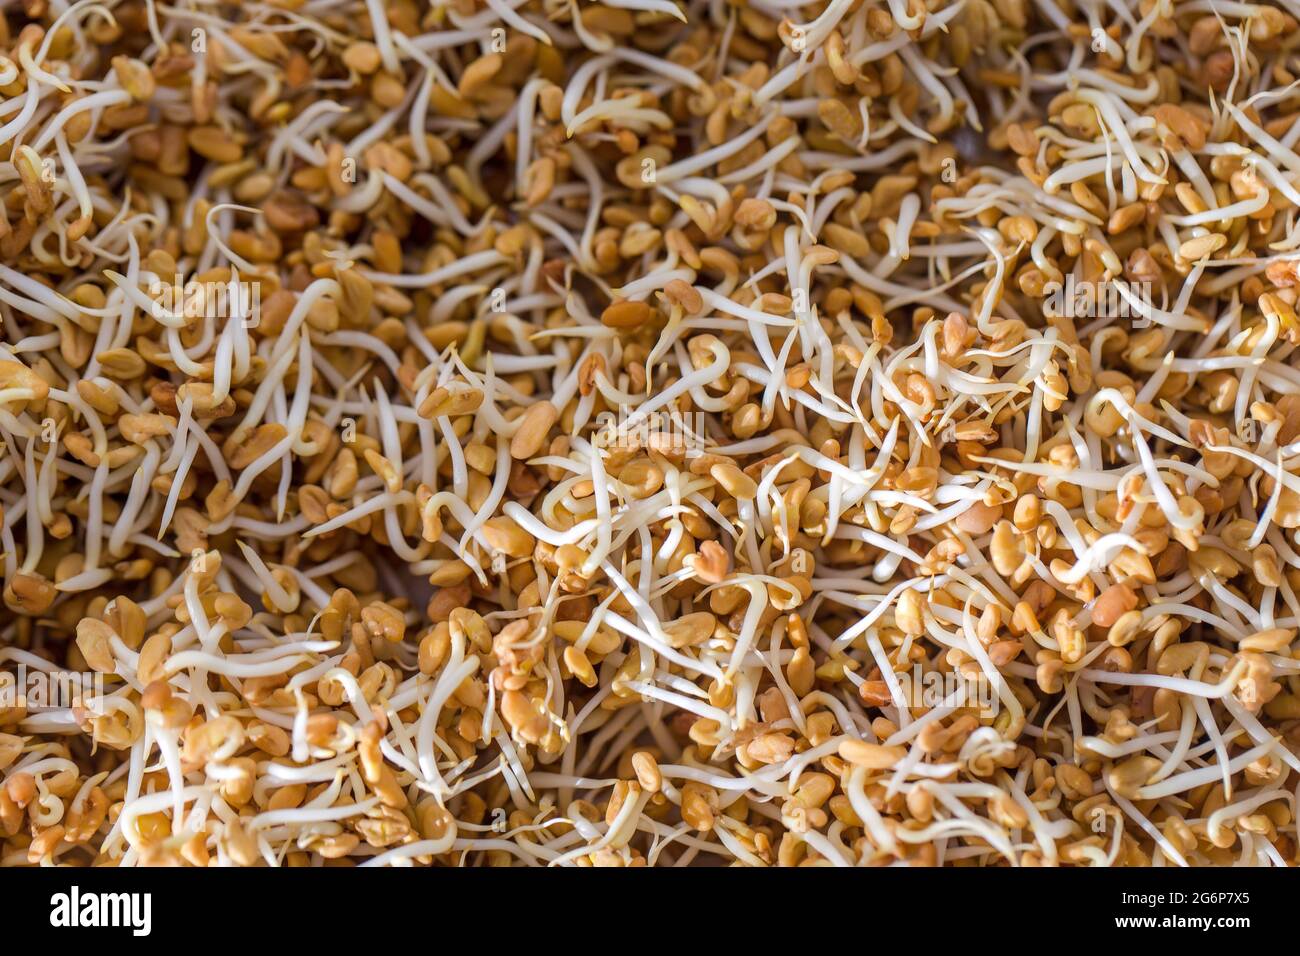 Close up of Sprouted Fenugreek (Methi) Seeds. Trigonella foenum-graecum, also used a traditional medicine has immense health benefits. Stock Photo